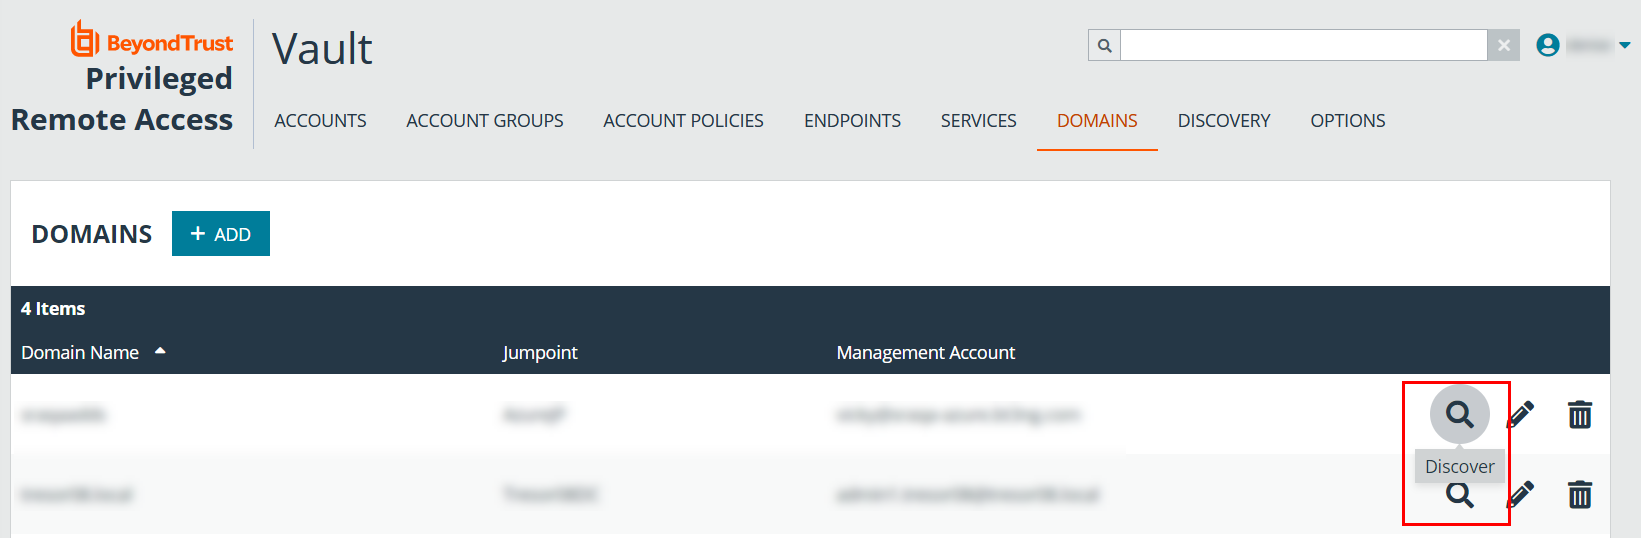 Screenshot of Vault > Domains page in /login highlighting the Discover button.